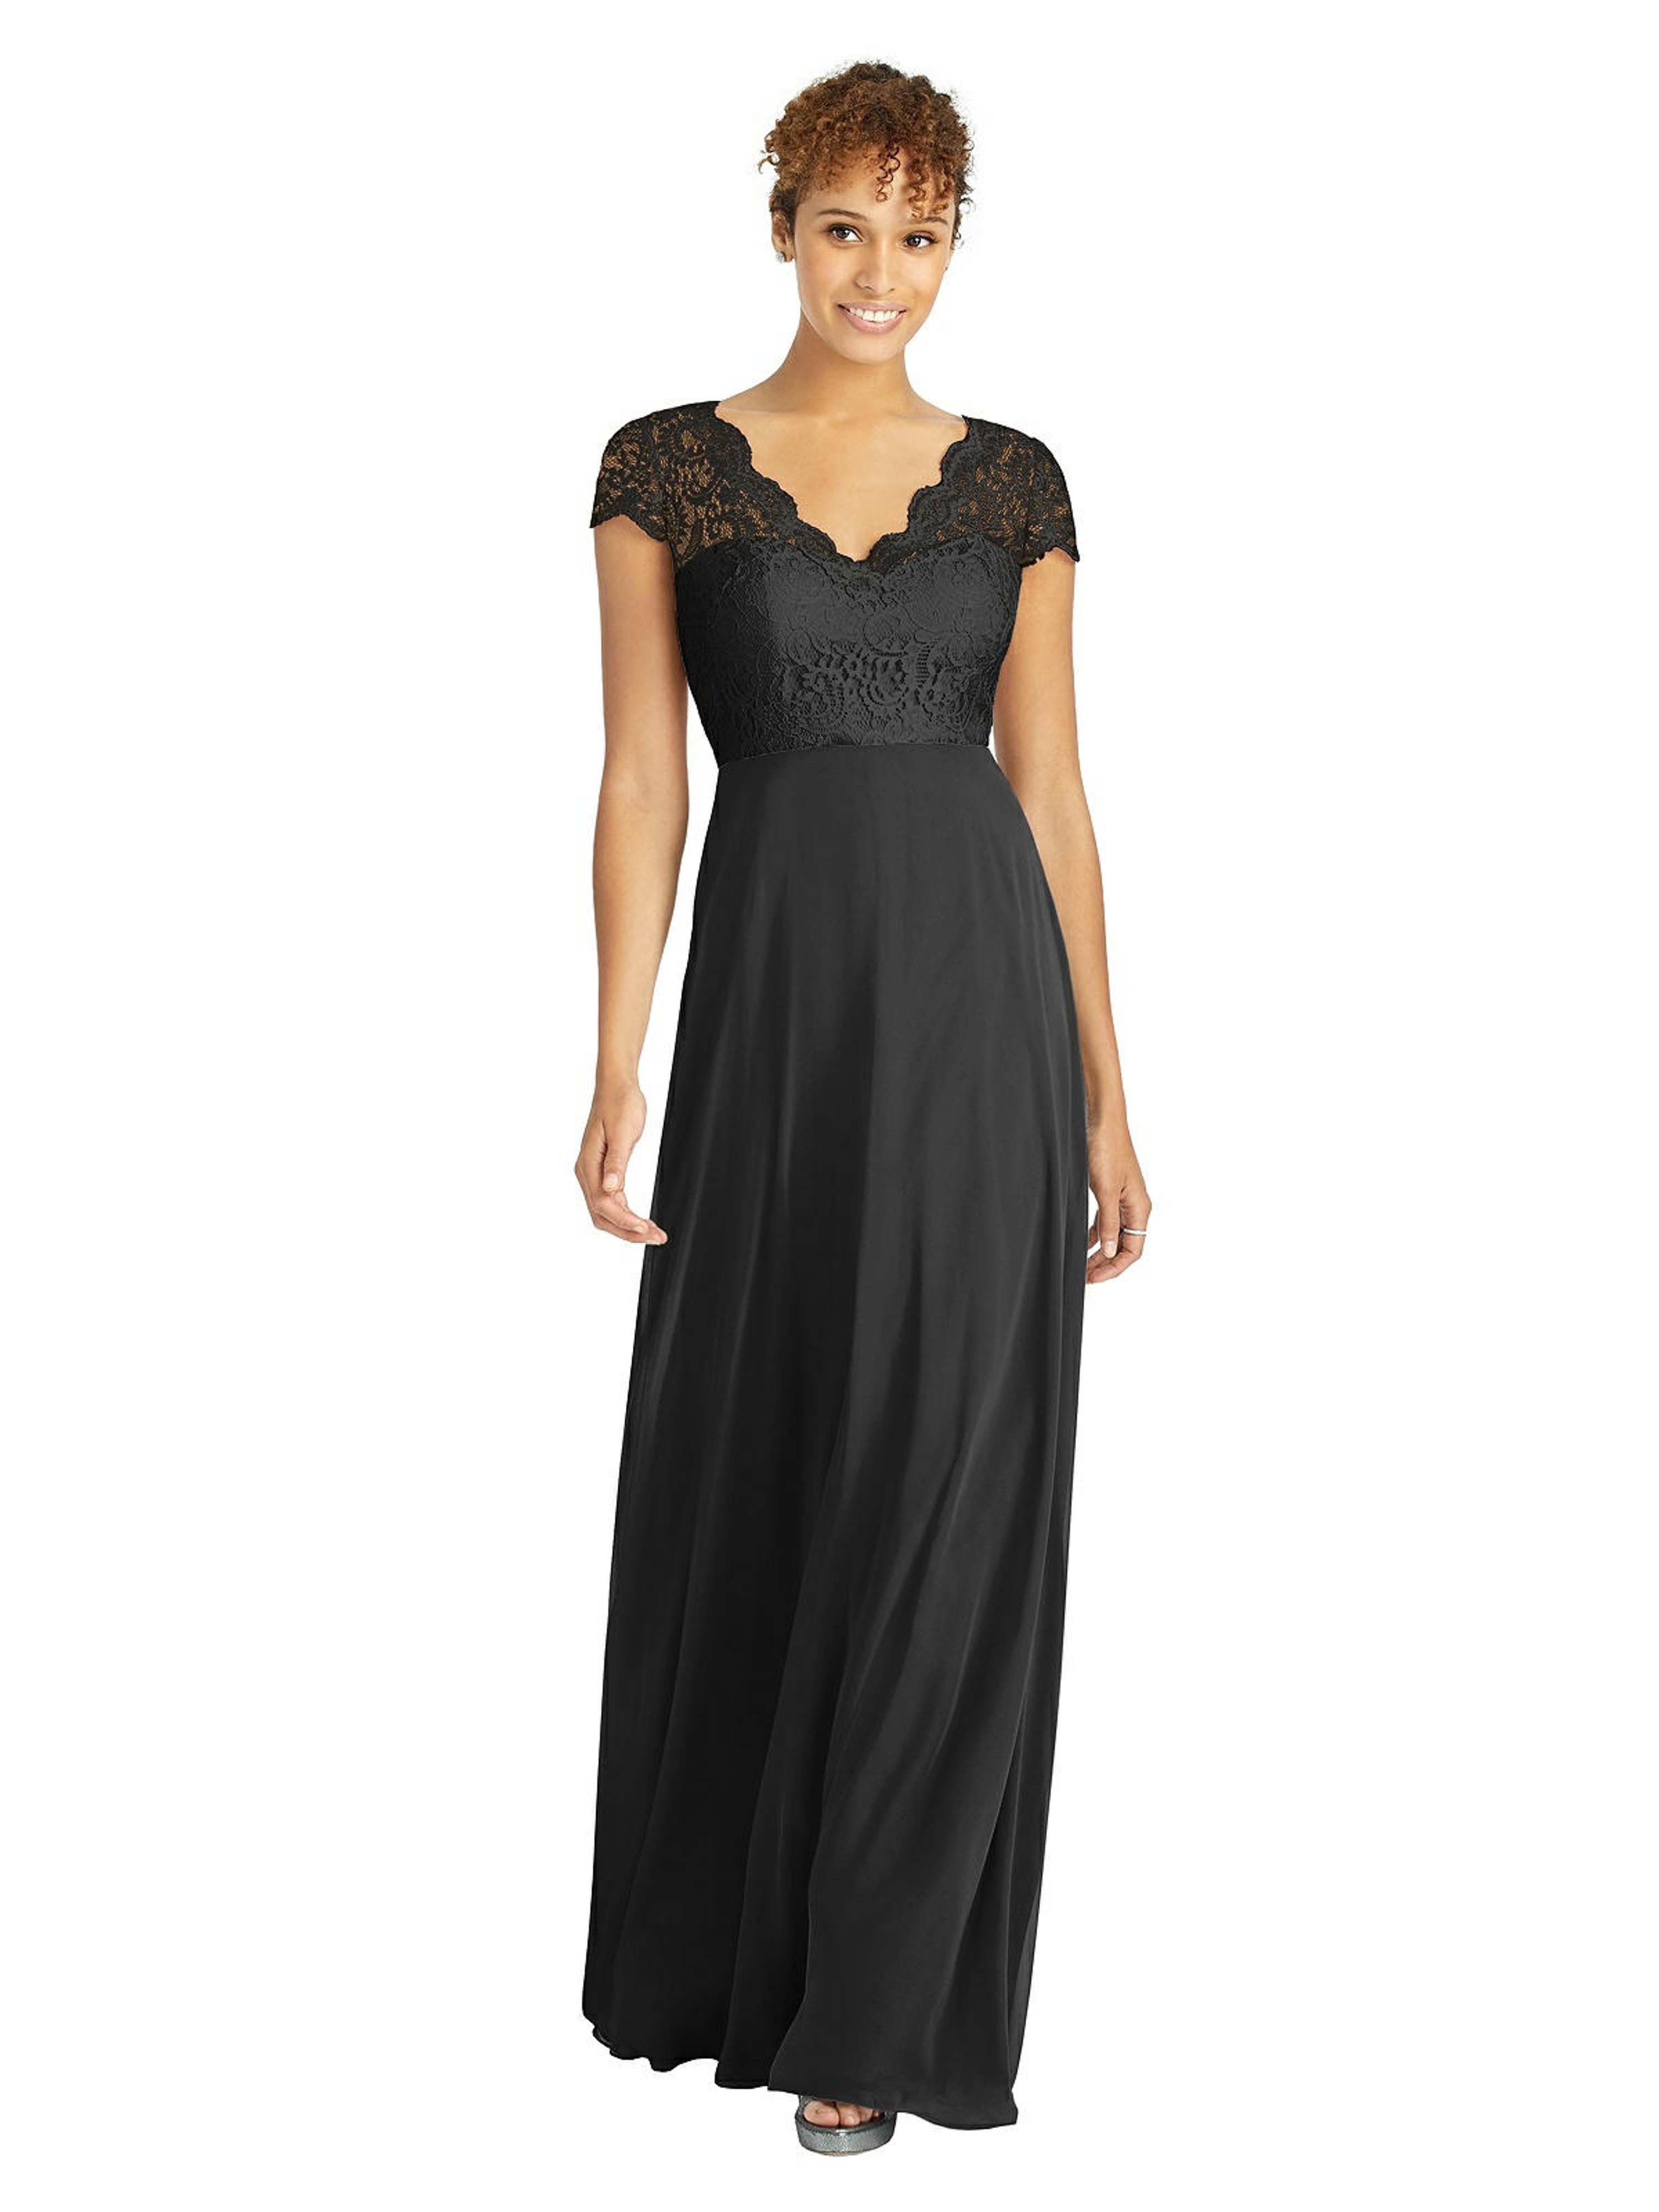 DESSY COLLECTION DESSY COLLECTION CAP SLEEVE ILLUSION-BACK LACE AND CHIFFON DRESS